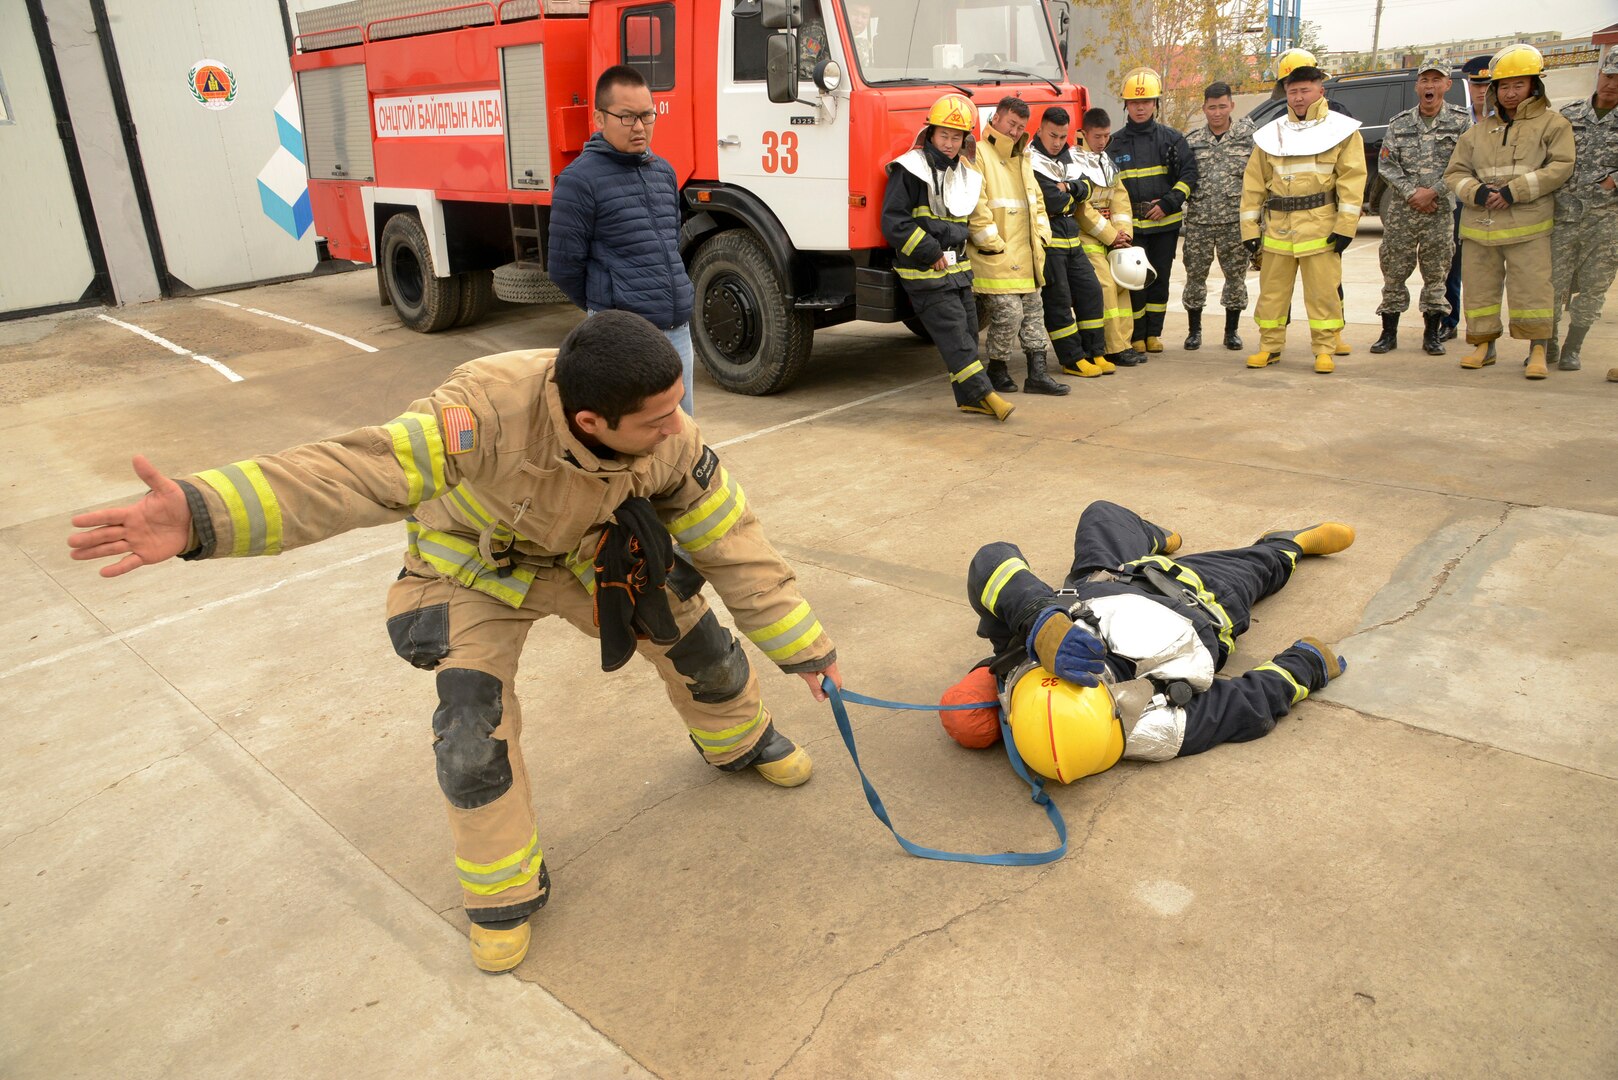 Cheyenne Sanchez, a firefighter and emergency medical technician from Juneau, Alaska, leads members of the National Emergency Management Agency (NEMA) through a series of training situations during the Gobi Wolf 19 Exercise, Sept. 11, 2019 in Sainshand, Mongolia. GW 19 is hosted by the Mongolian National Emergency Management Agency and Mongolian Armed Forces as part of the U.S. Army Pacific's humanitarian assistance and disaster relief "Pacific Resilience" series.